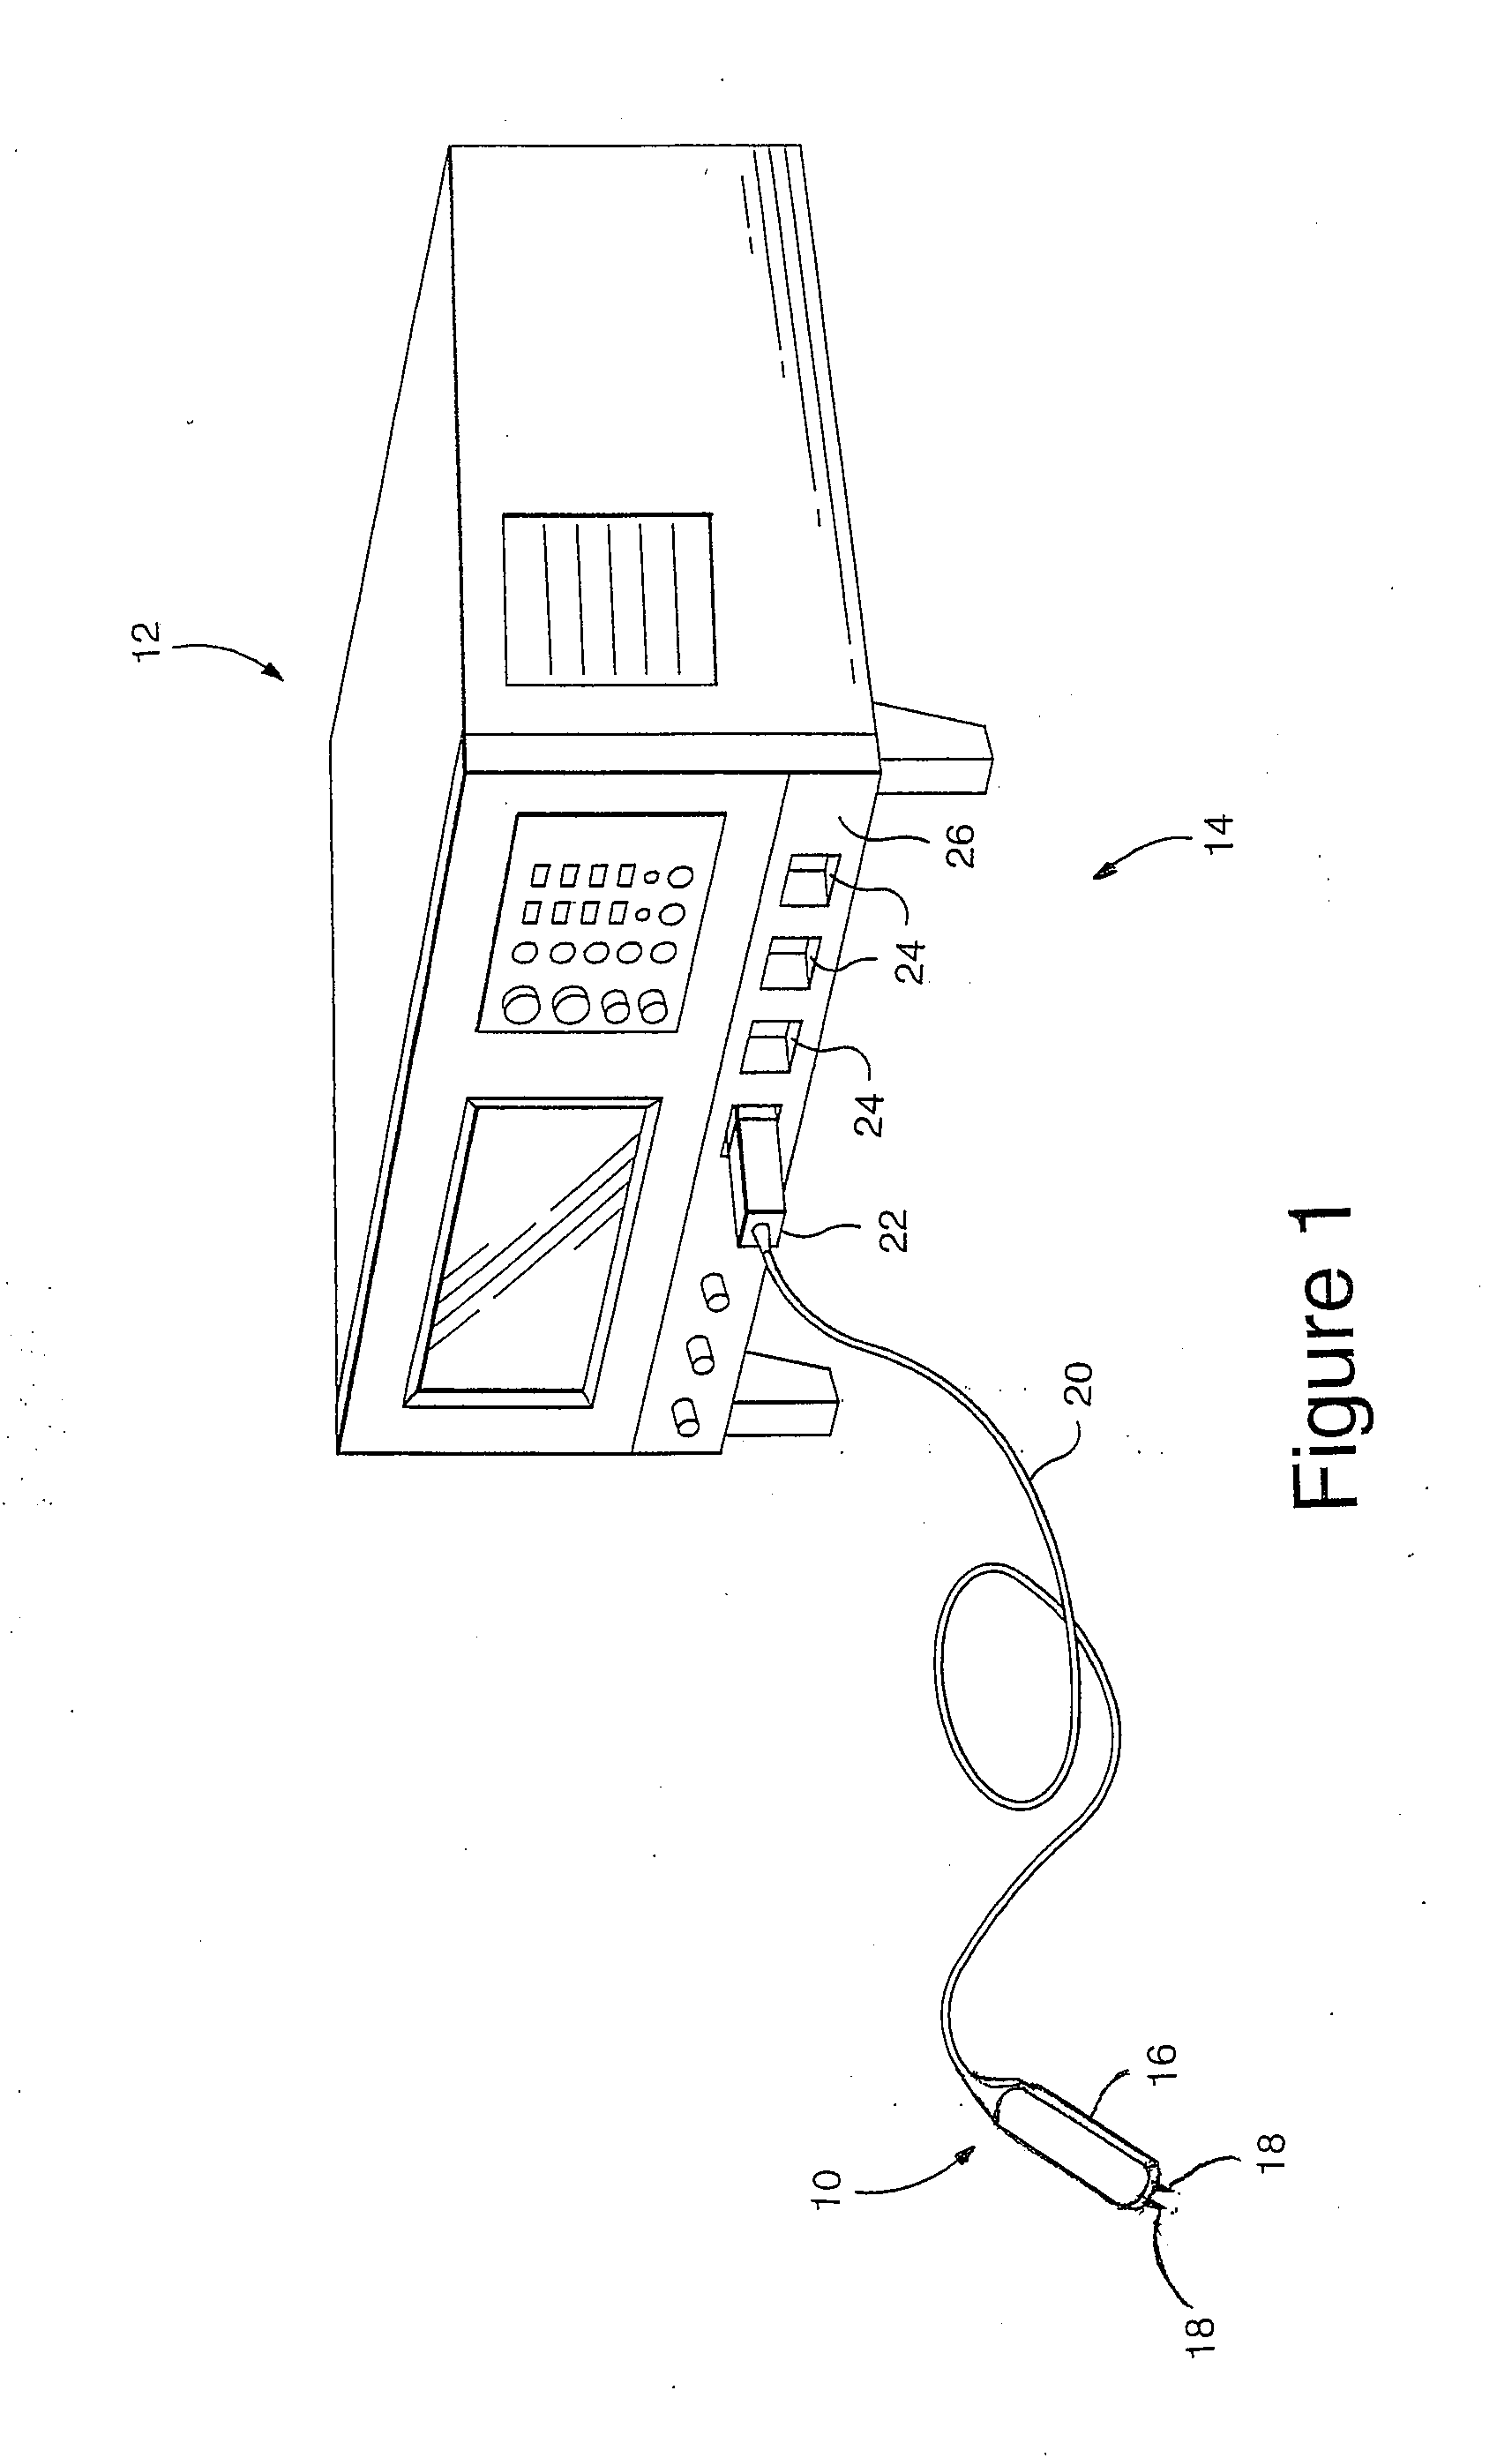 Signal Acquisition Probe Storing Compressed or Compressed and Filtered Time Domain Impulse or Step Response Data for Use in a Signal Measurement System